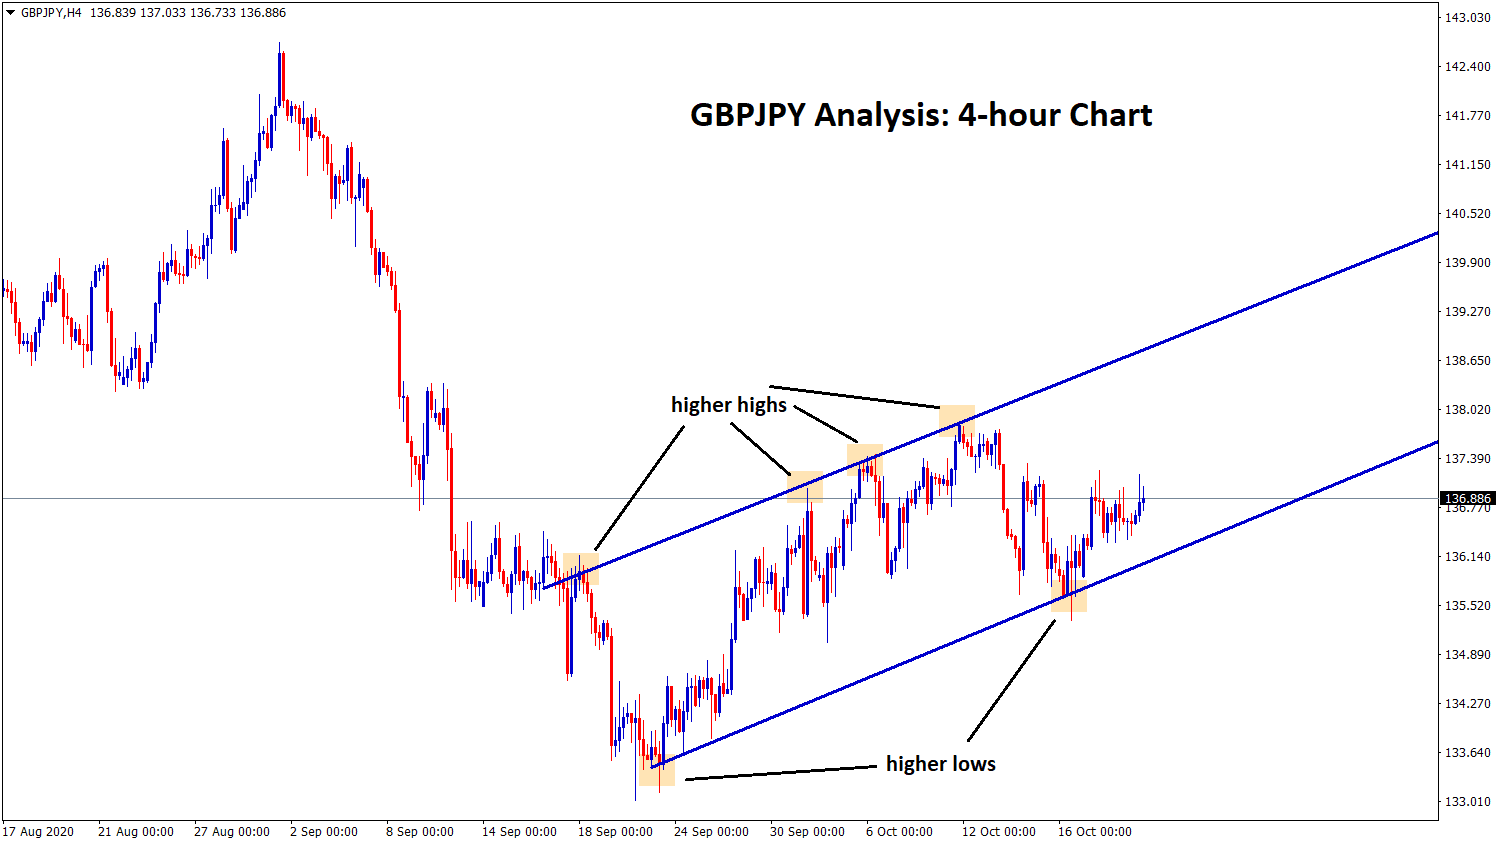 gbpjpy in the middle of forming higher high